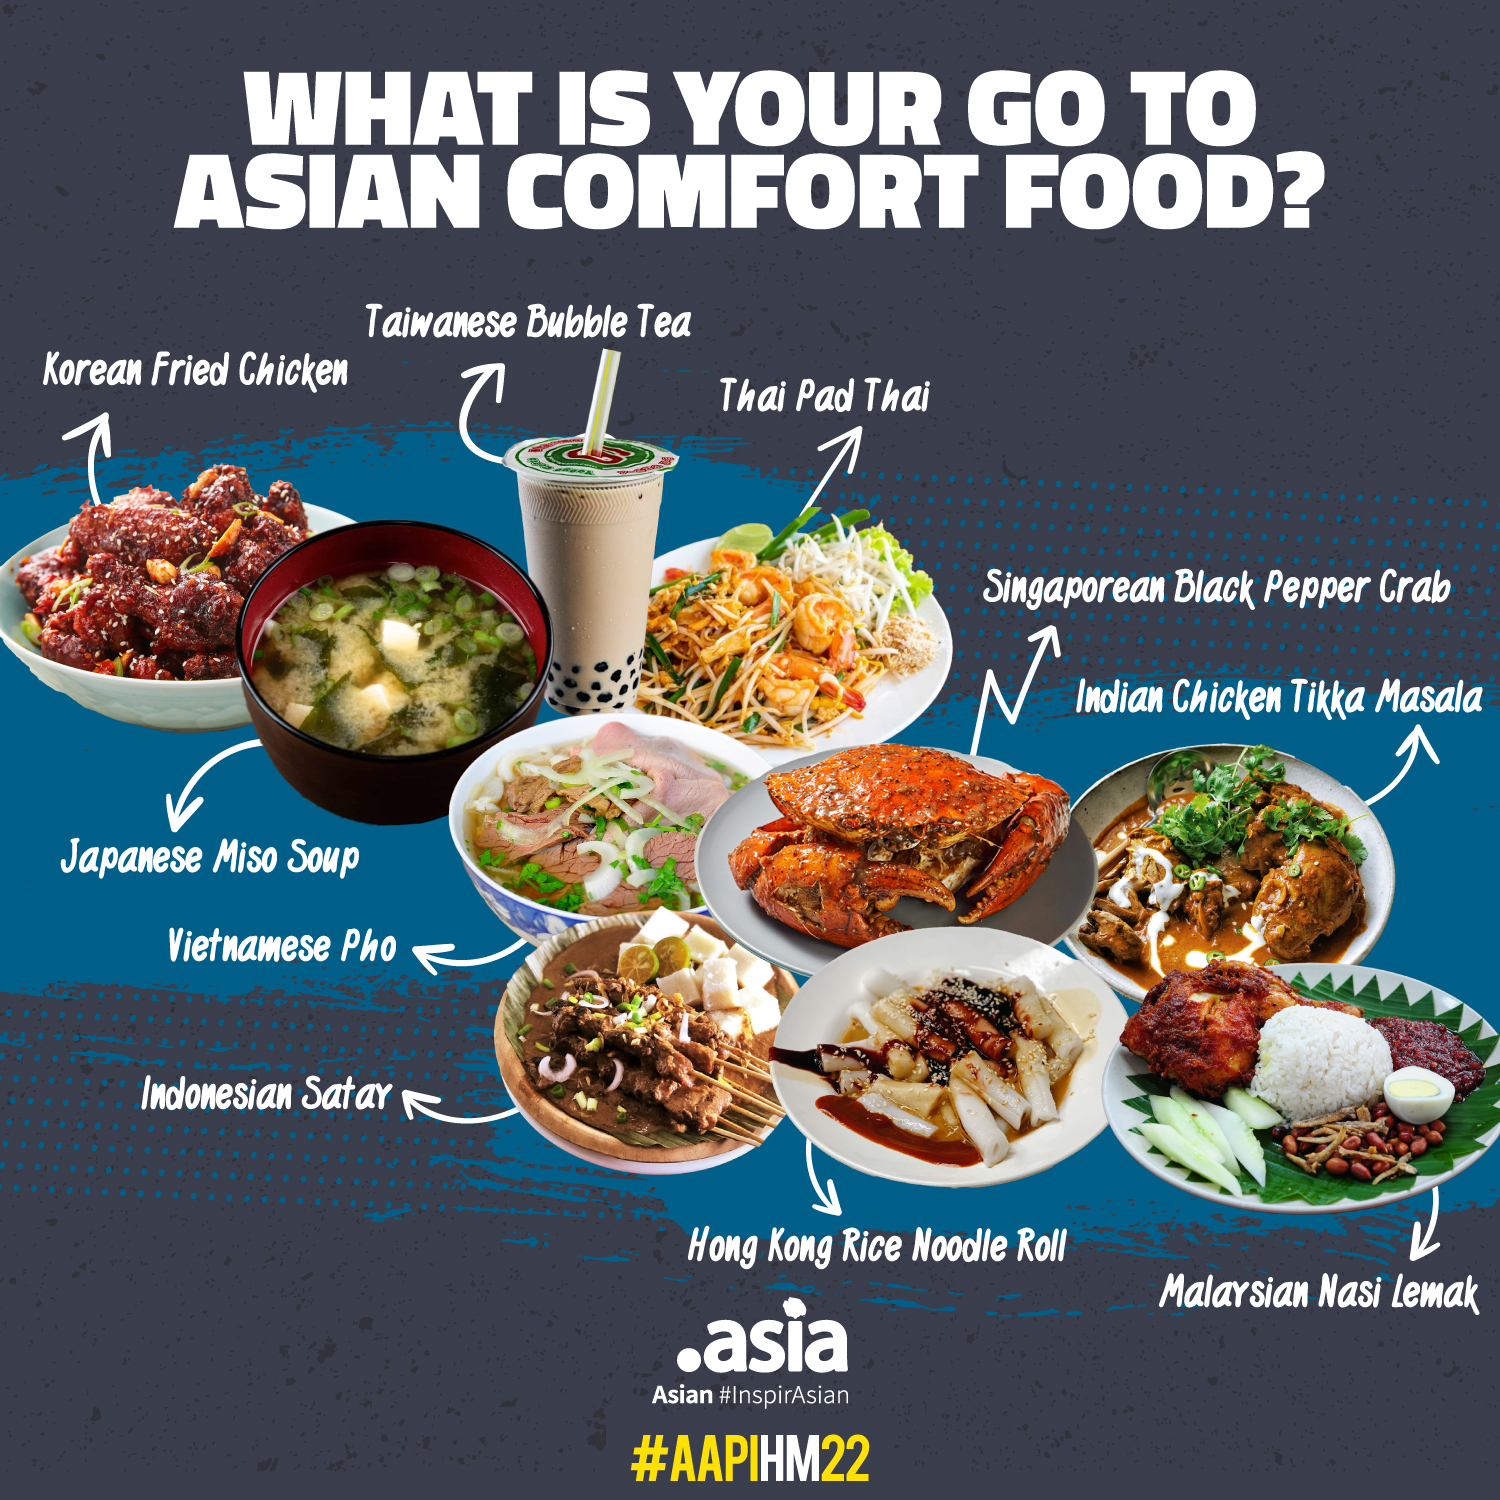 Image: What is your go to Asian comfort food?